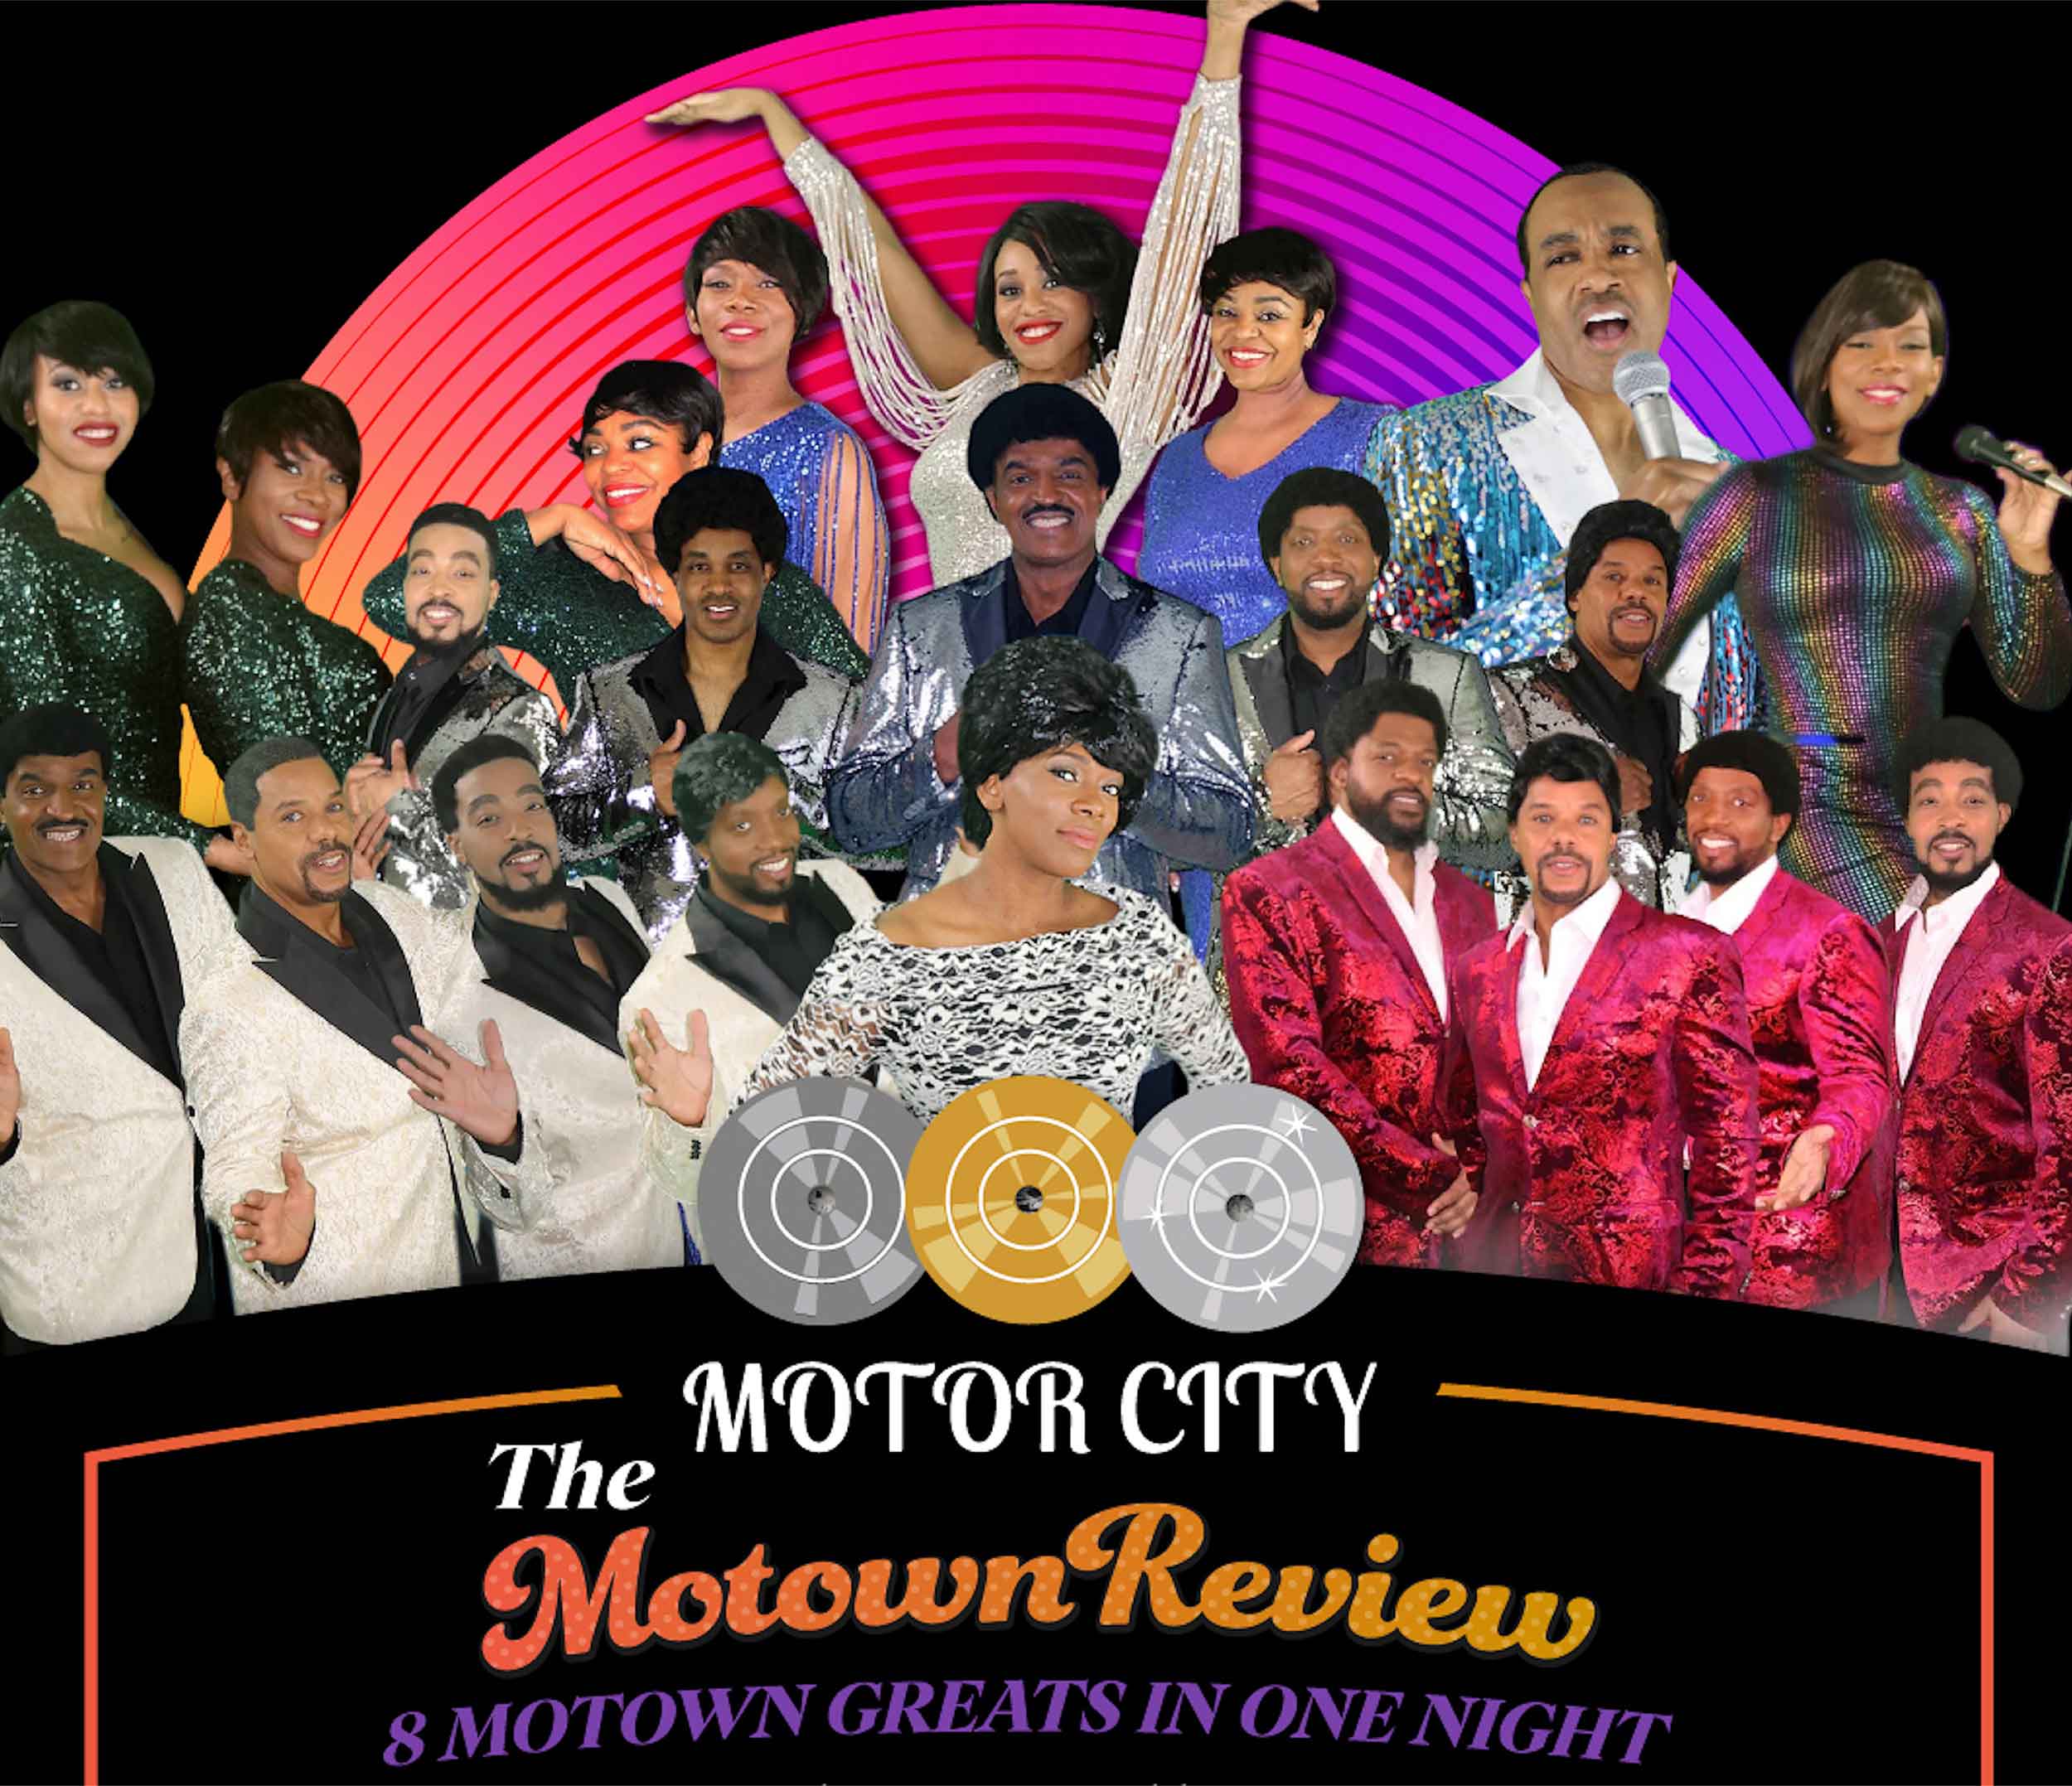 Motor City "The Motown Review"